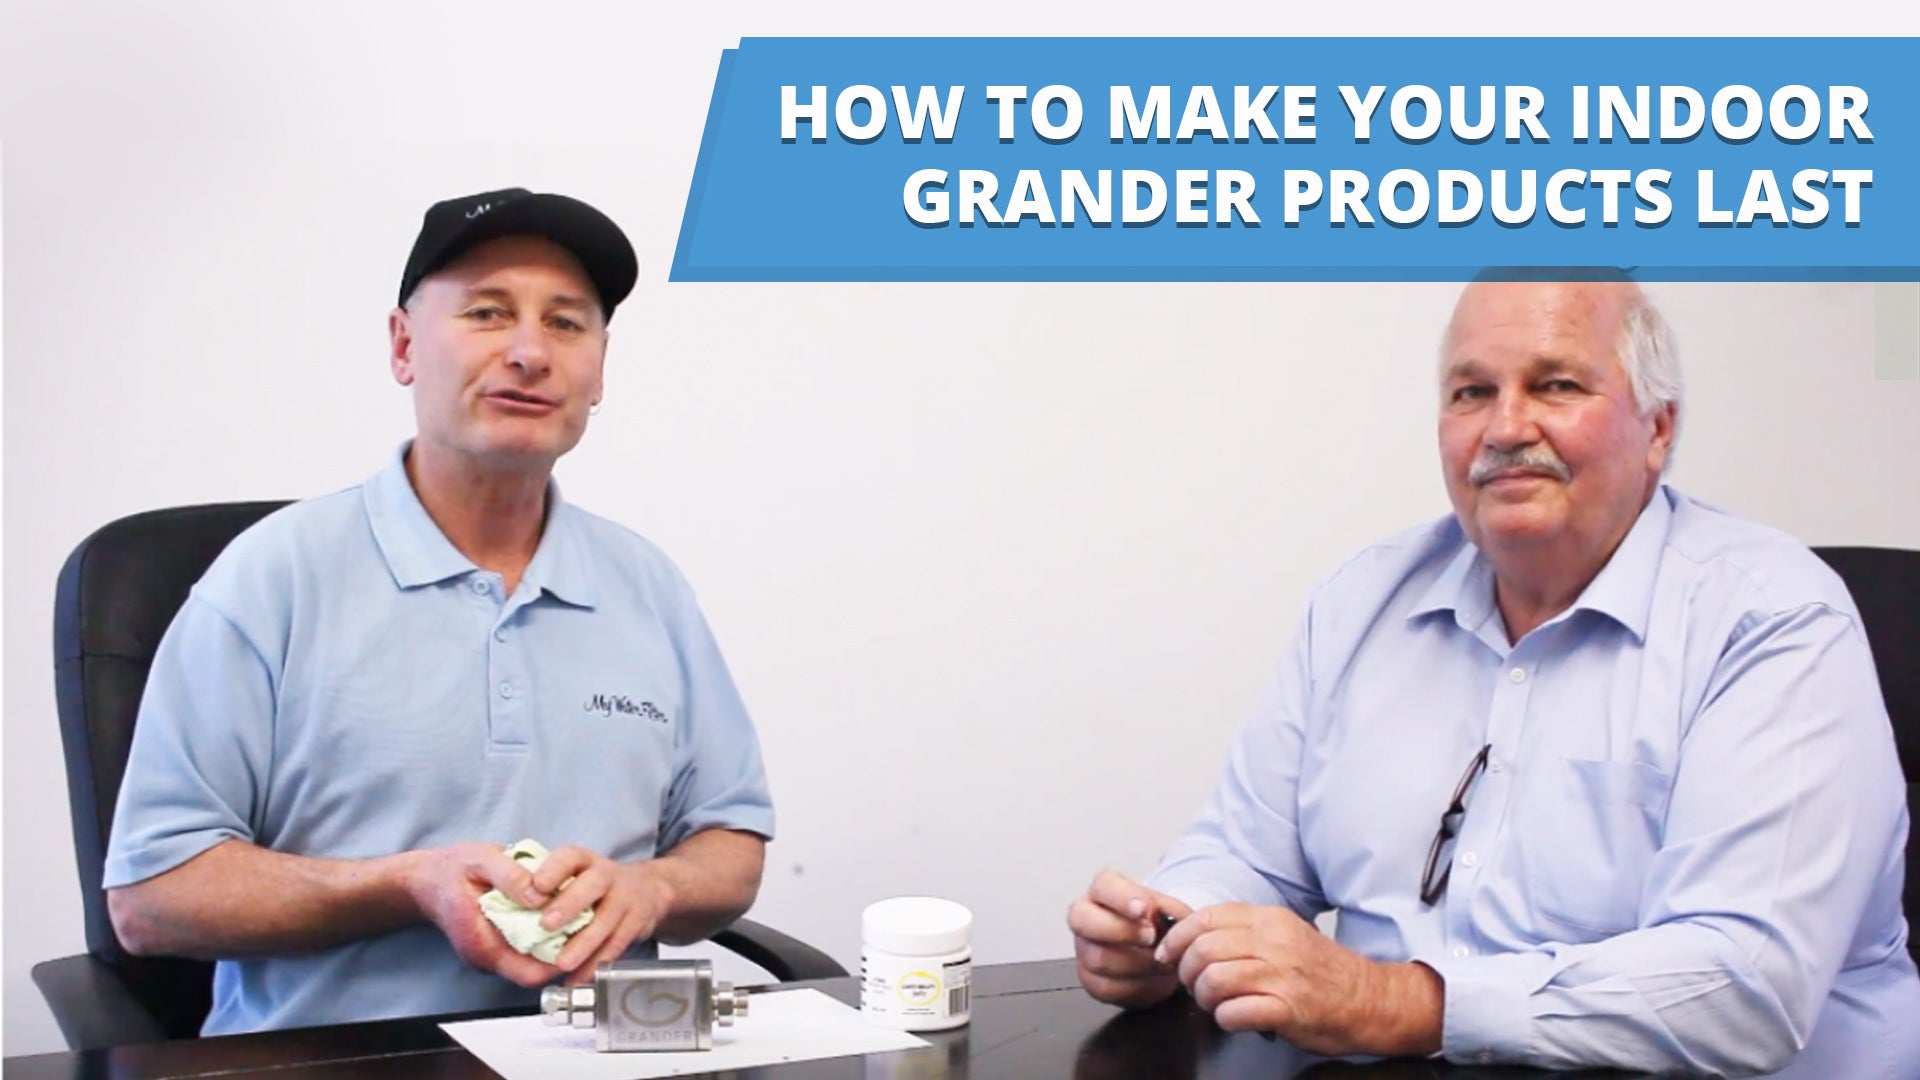 [VIDEO] How to make your Indoor Grander Products Last - Product Care Video